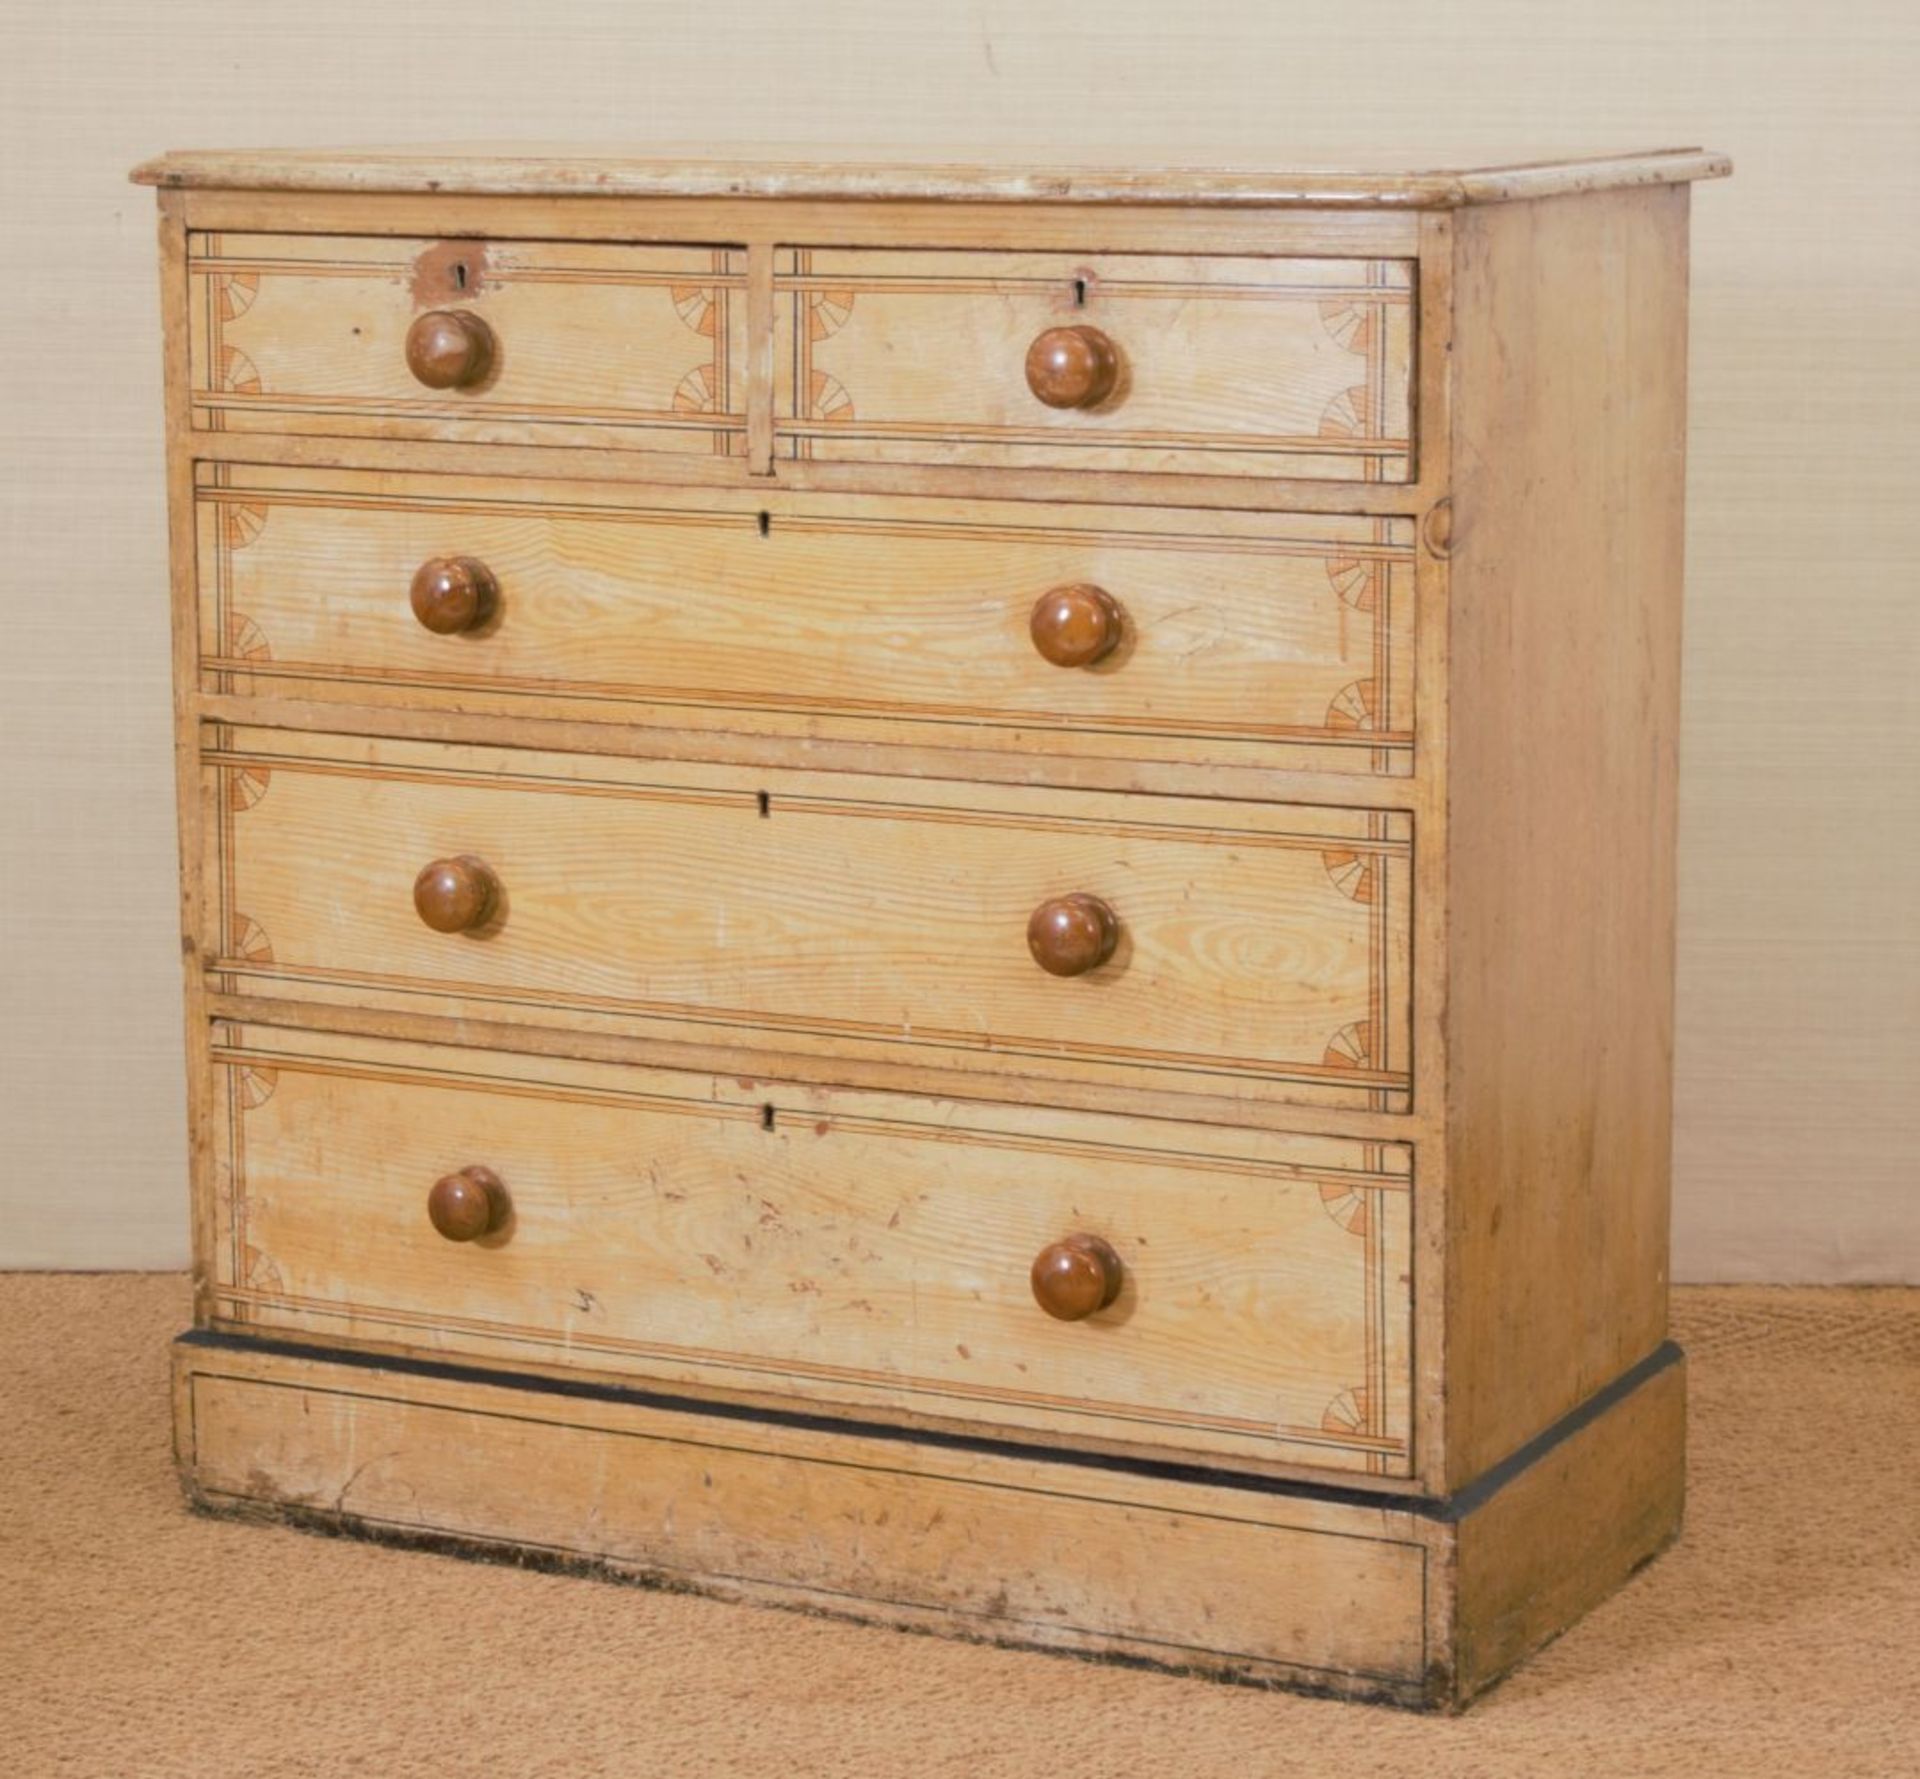 19TH-CENTURY SCUMBLE PINE CHEST OF DRAWERS - Image 2 of 2